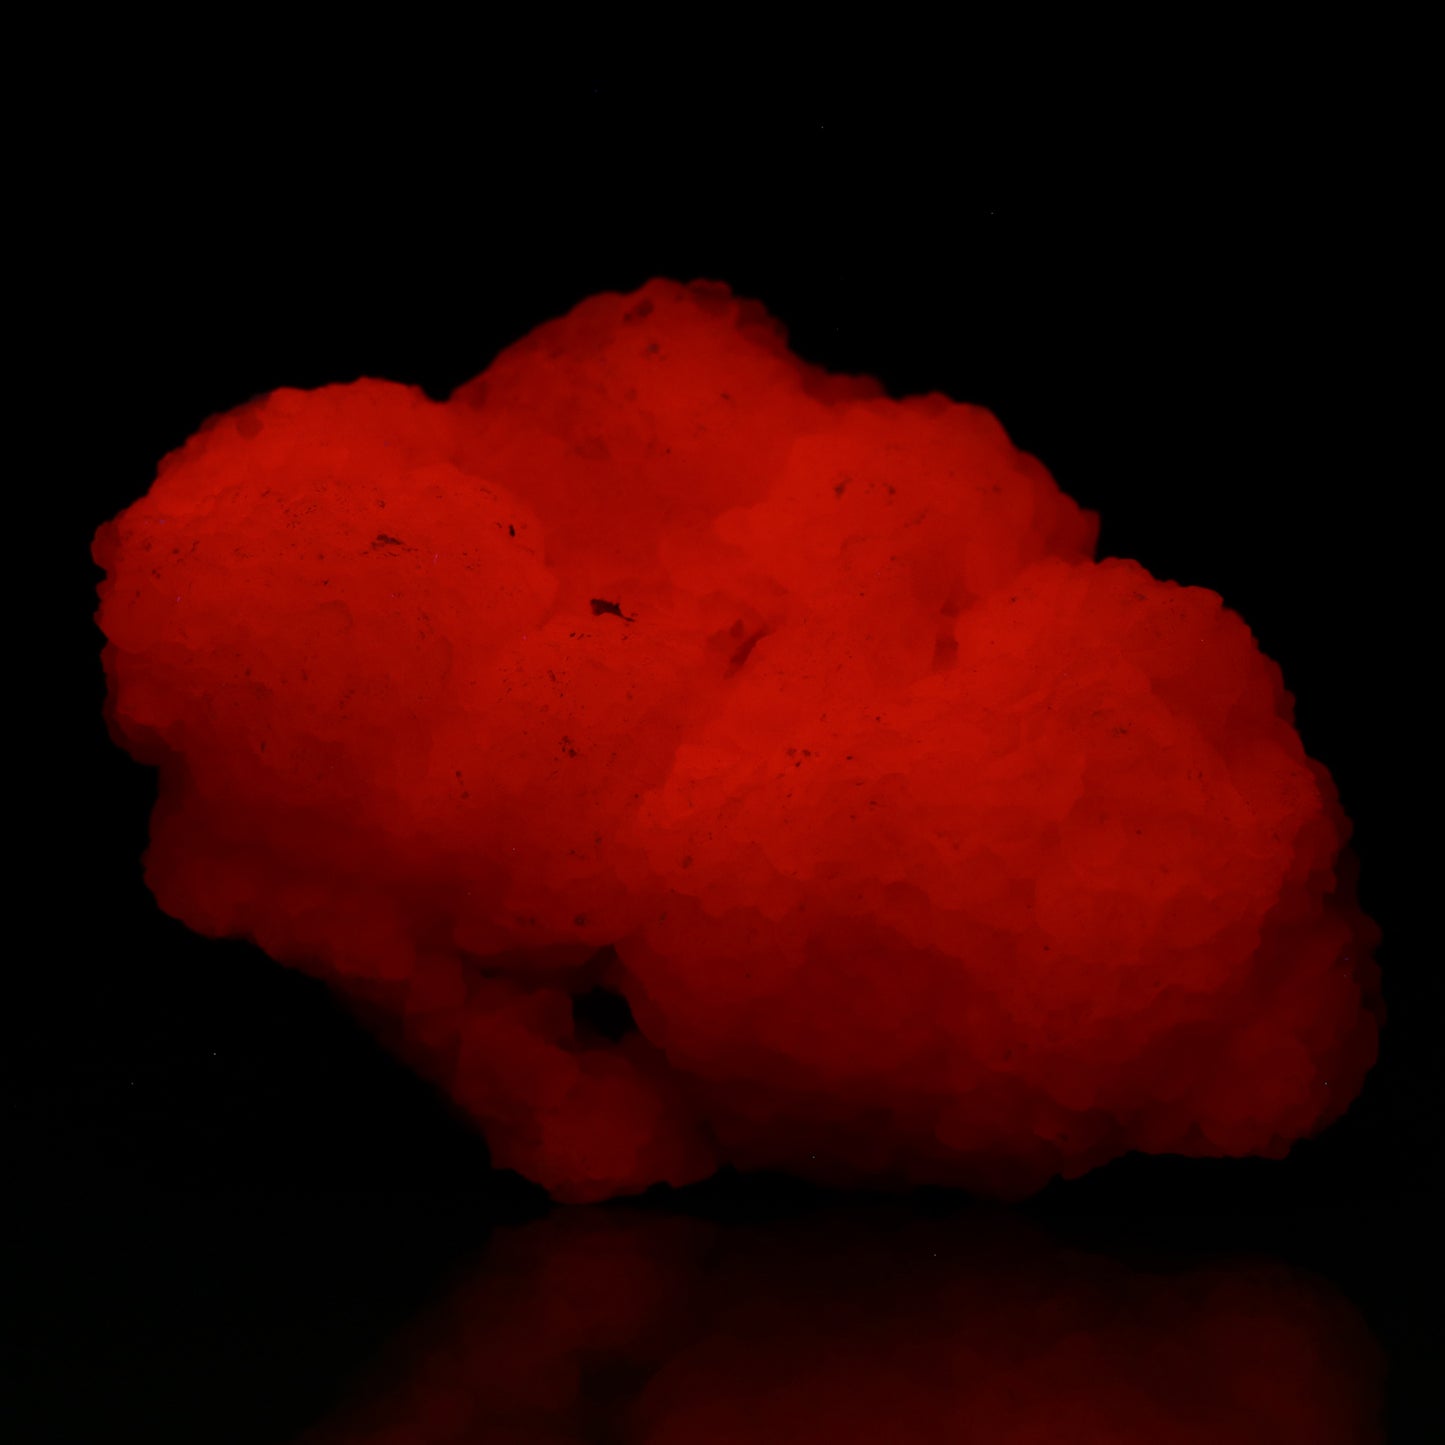 Datolite on Calcite (Fluorescent), Wessels Mine, Kalahari Manganese Field, Northern Cape, South Africa